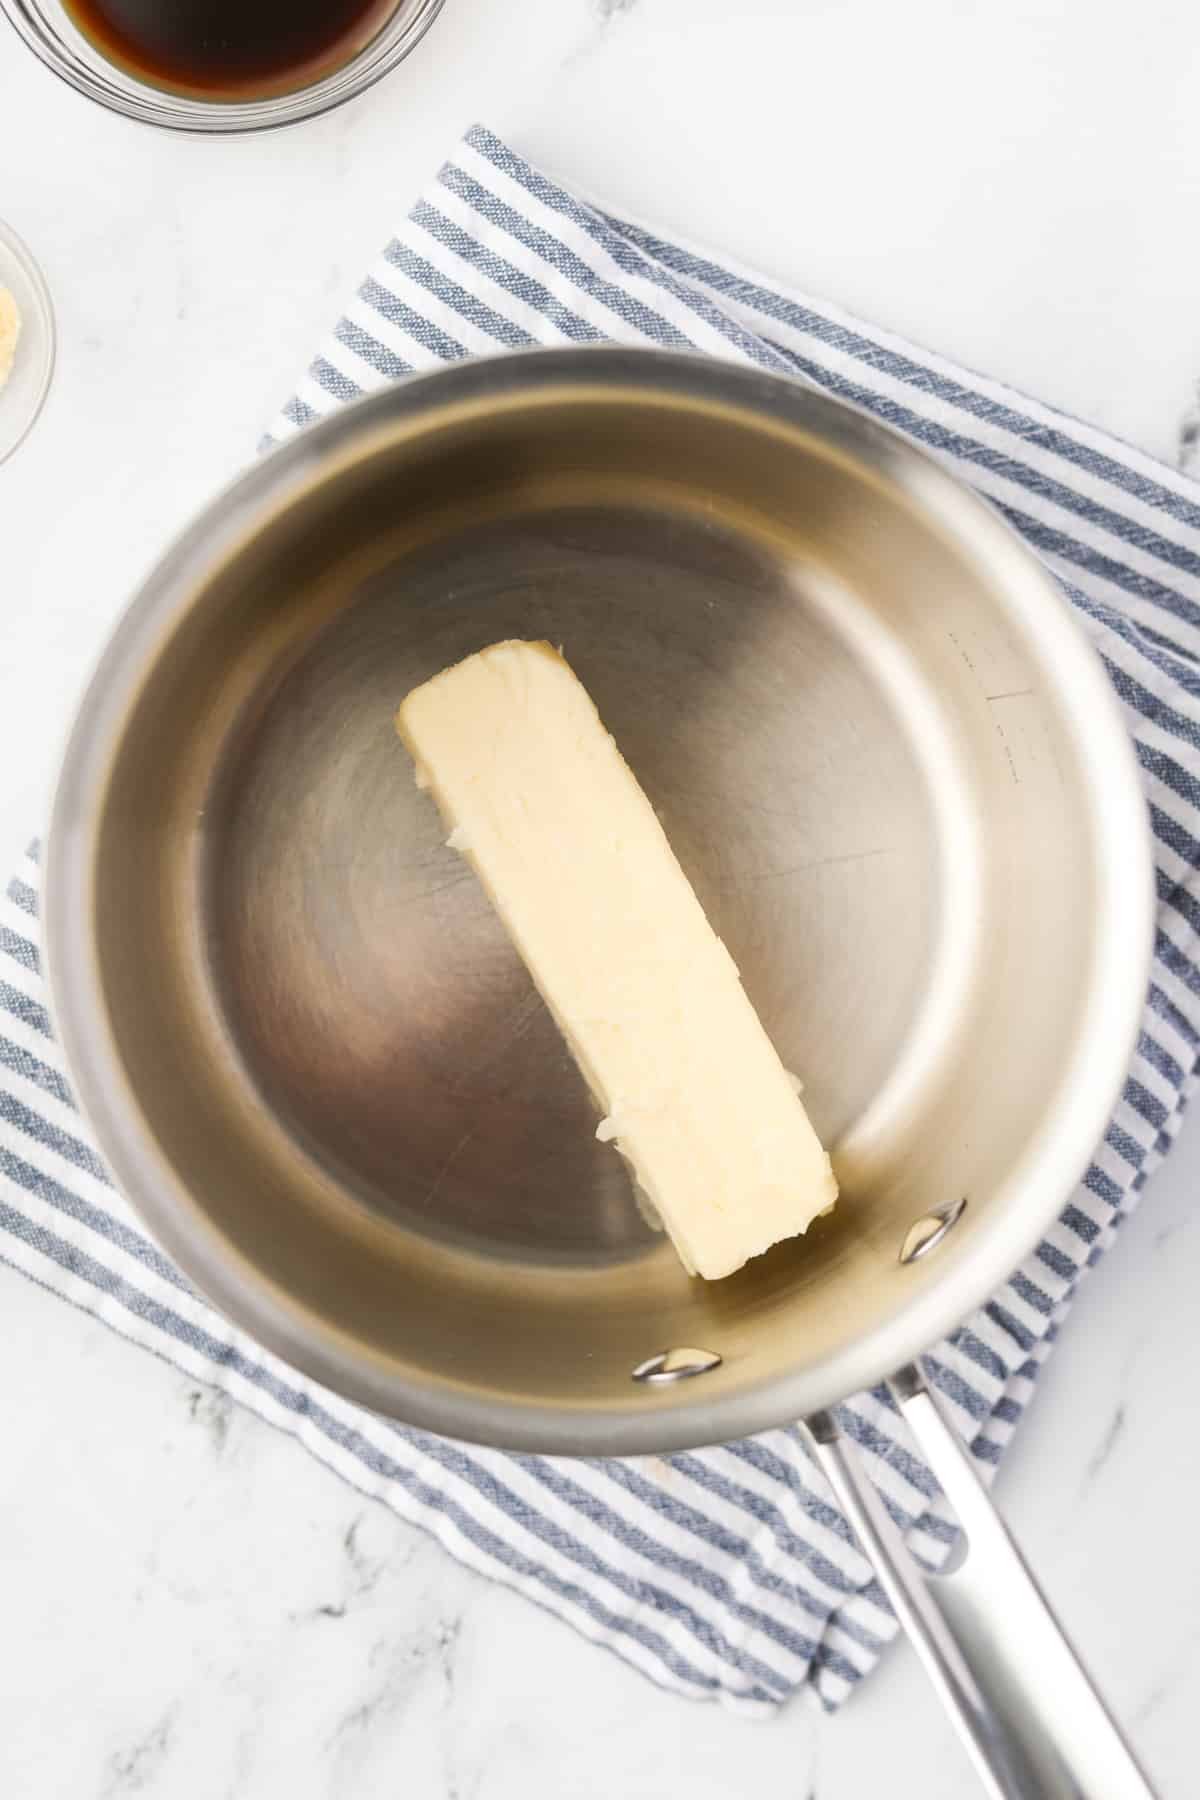 A saucepan with a stick of butter in it.